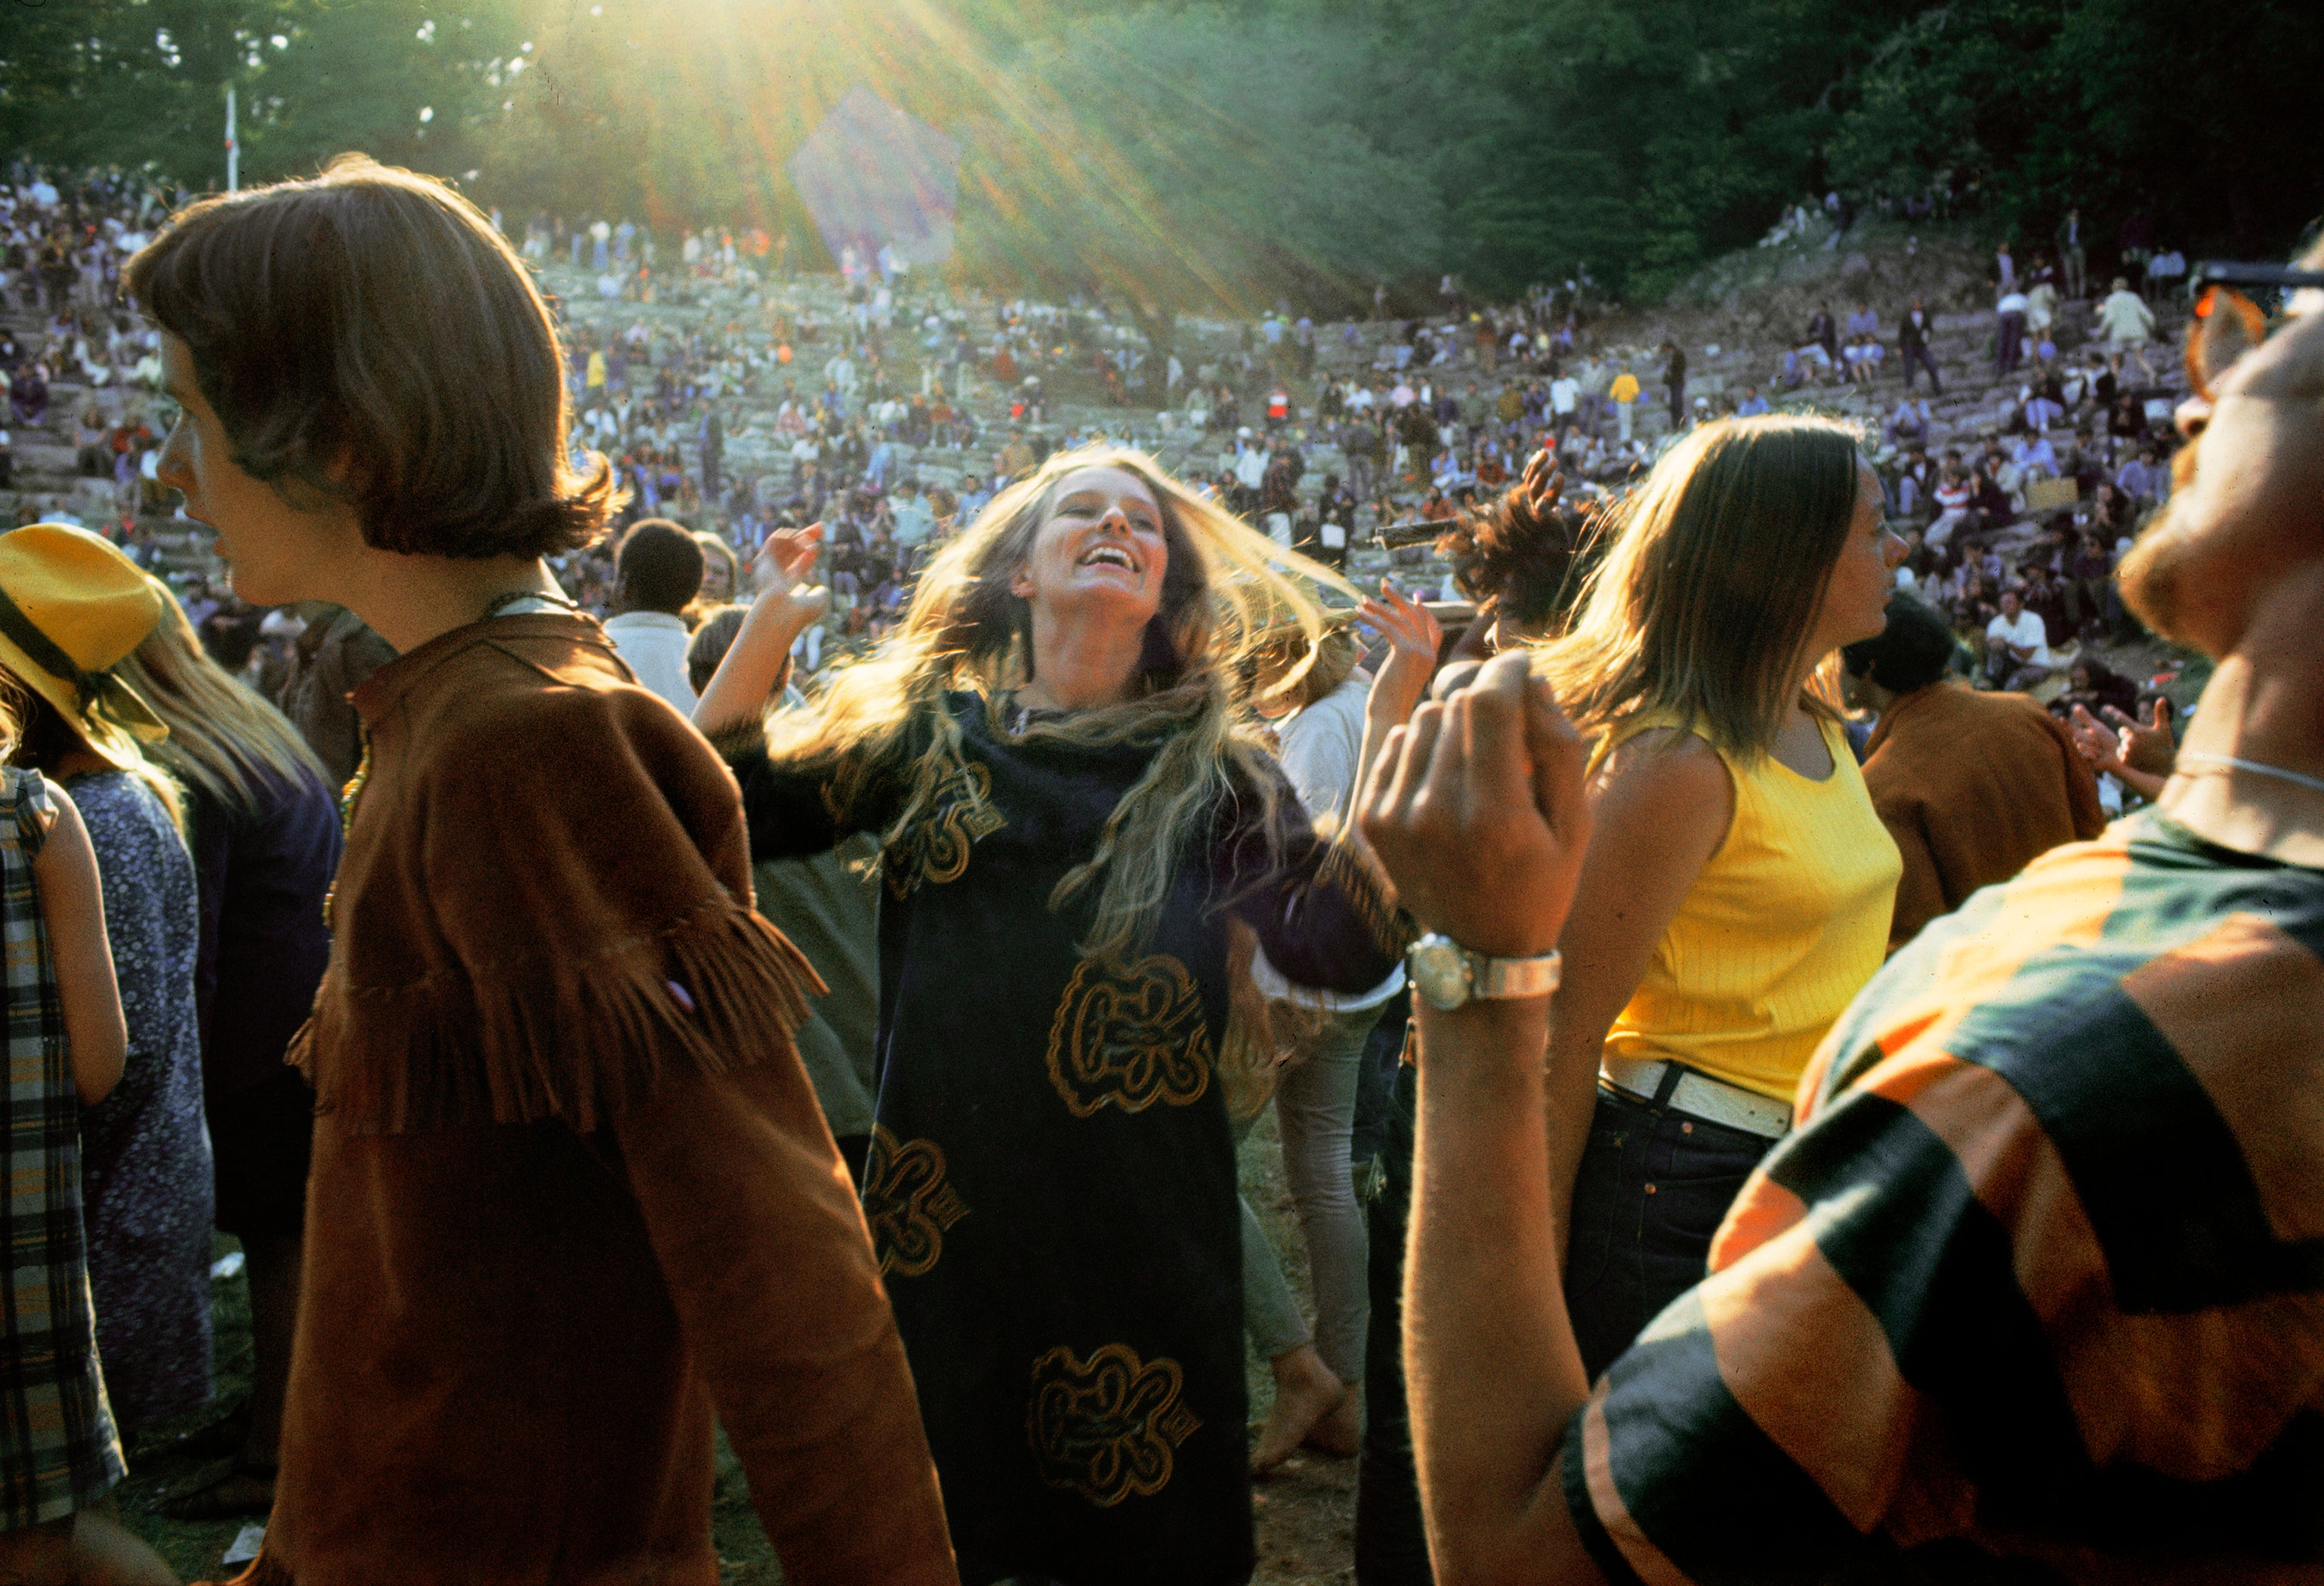 Is it too much to hope that 2021 could herald a return to a sense of hippie idealism and utopian hedonism that shaped the summers of 1967 and 1988?